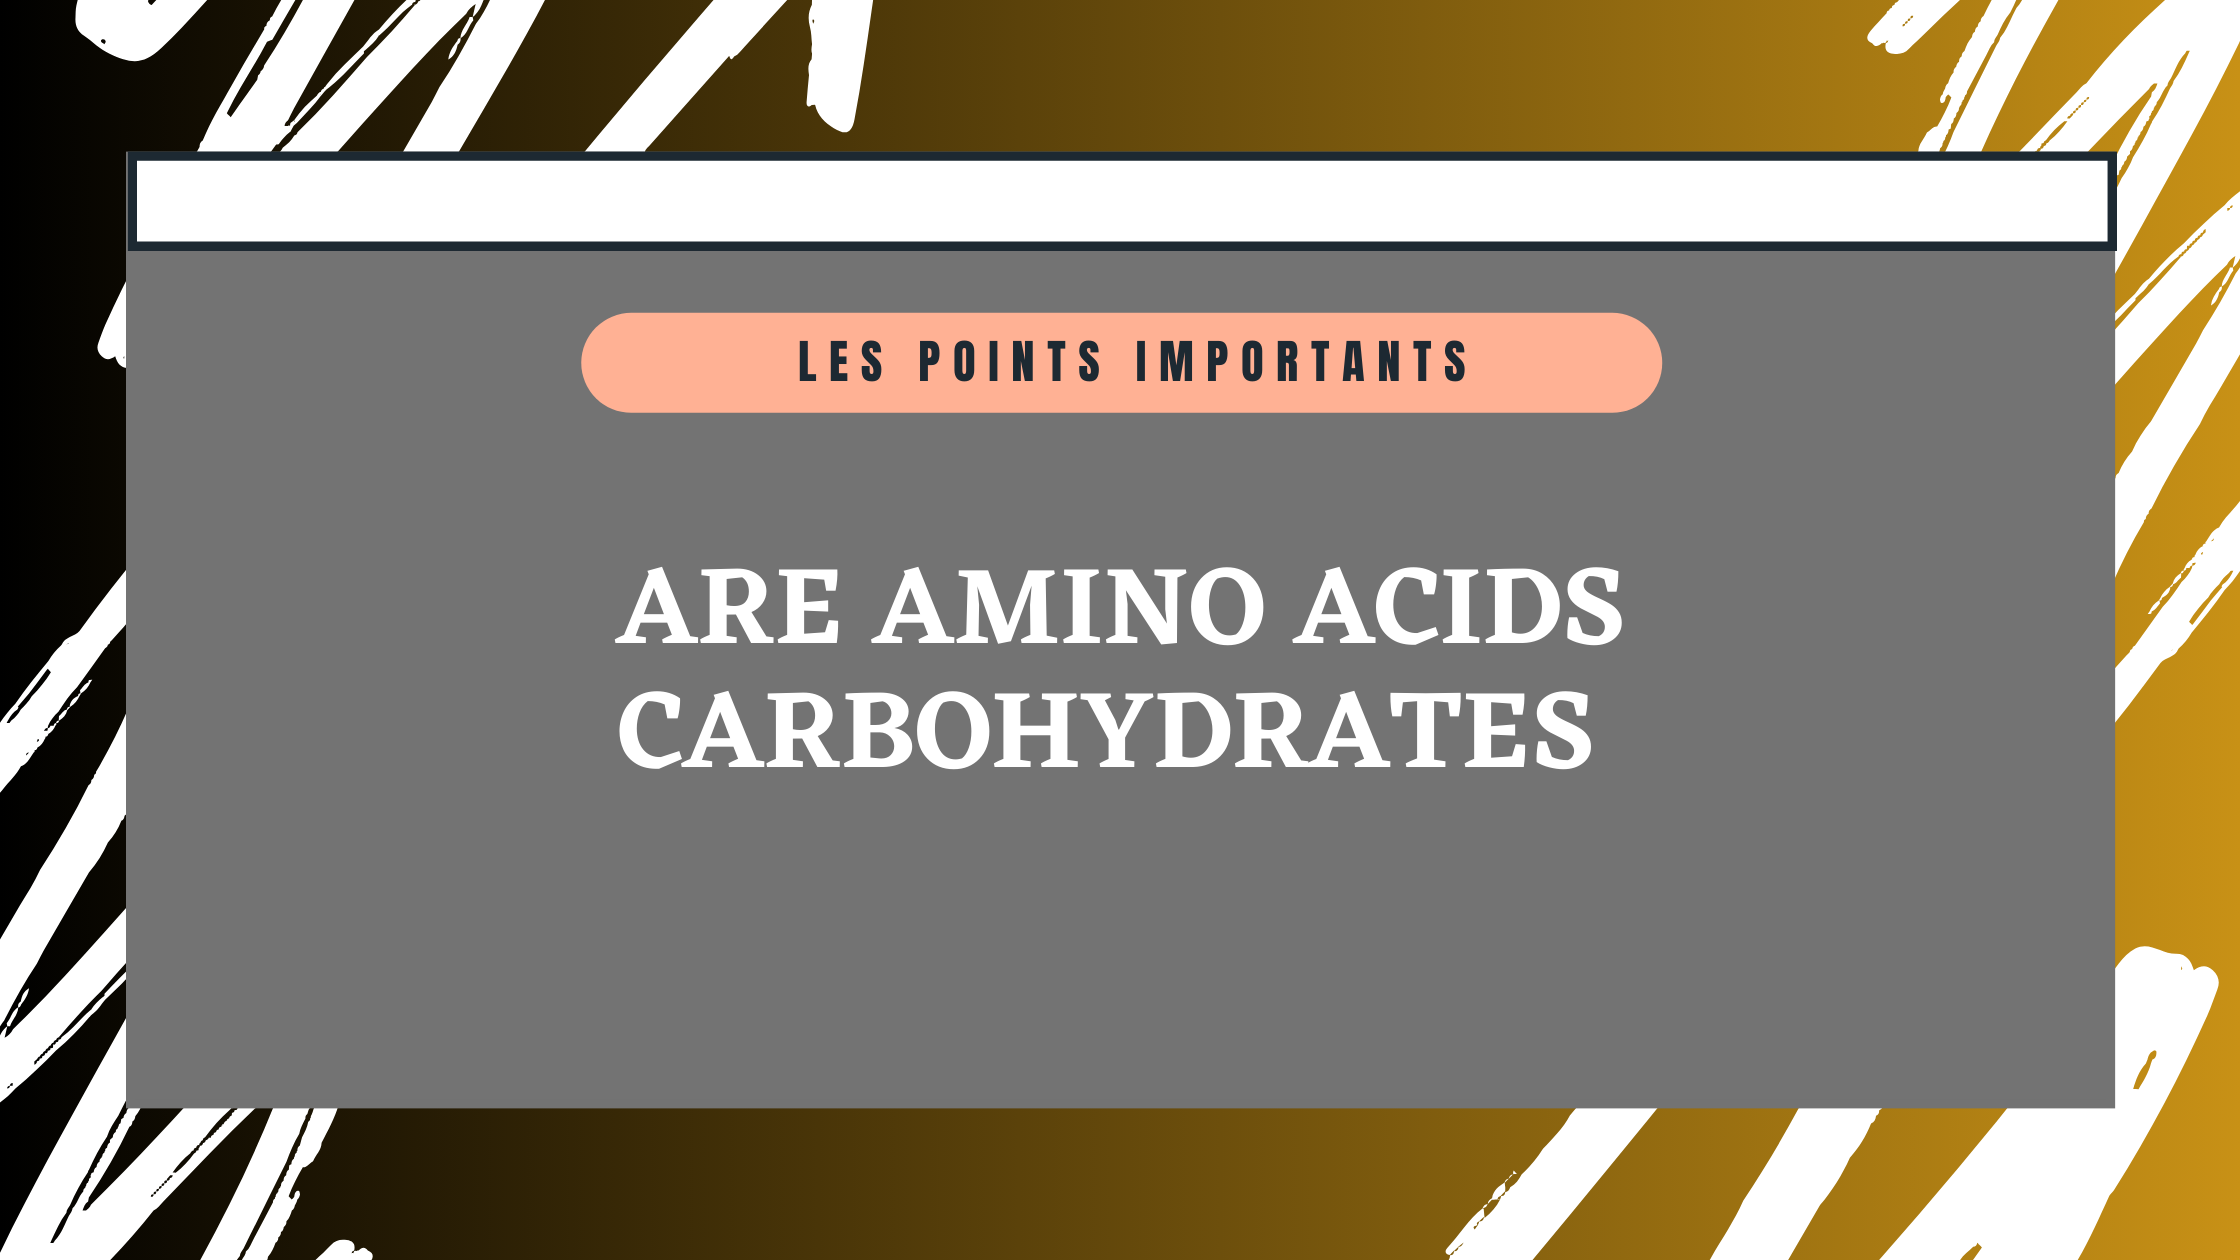 are amino acids carbohydrates | Les points importants